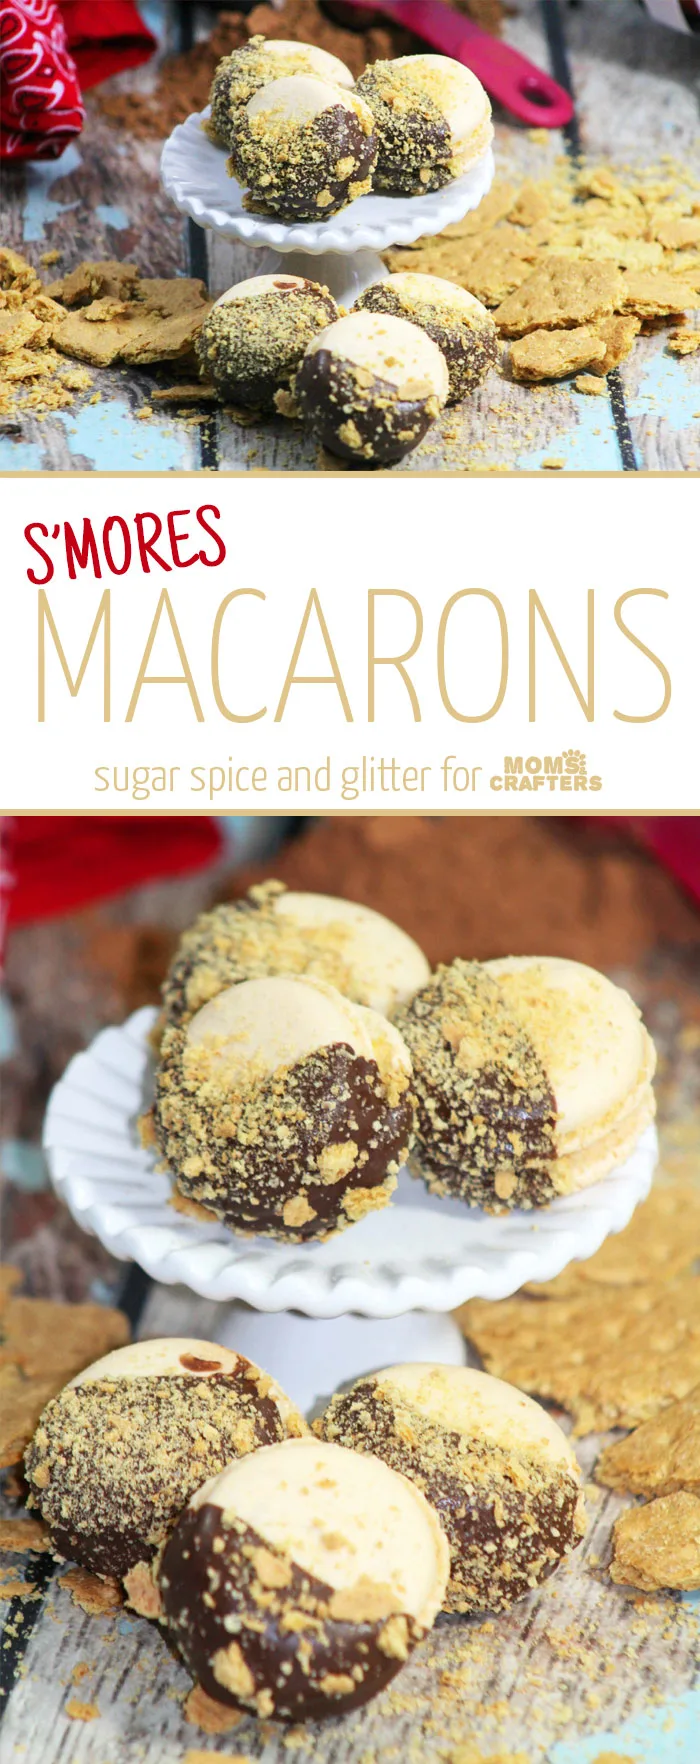 Make these delicious S'mores macarons - a showstopping dessert recipe perfect for parties and special occasions! It's mouth-watering and great food for entertaining.